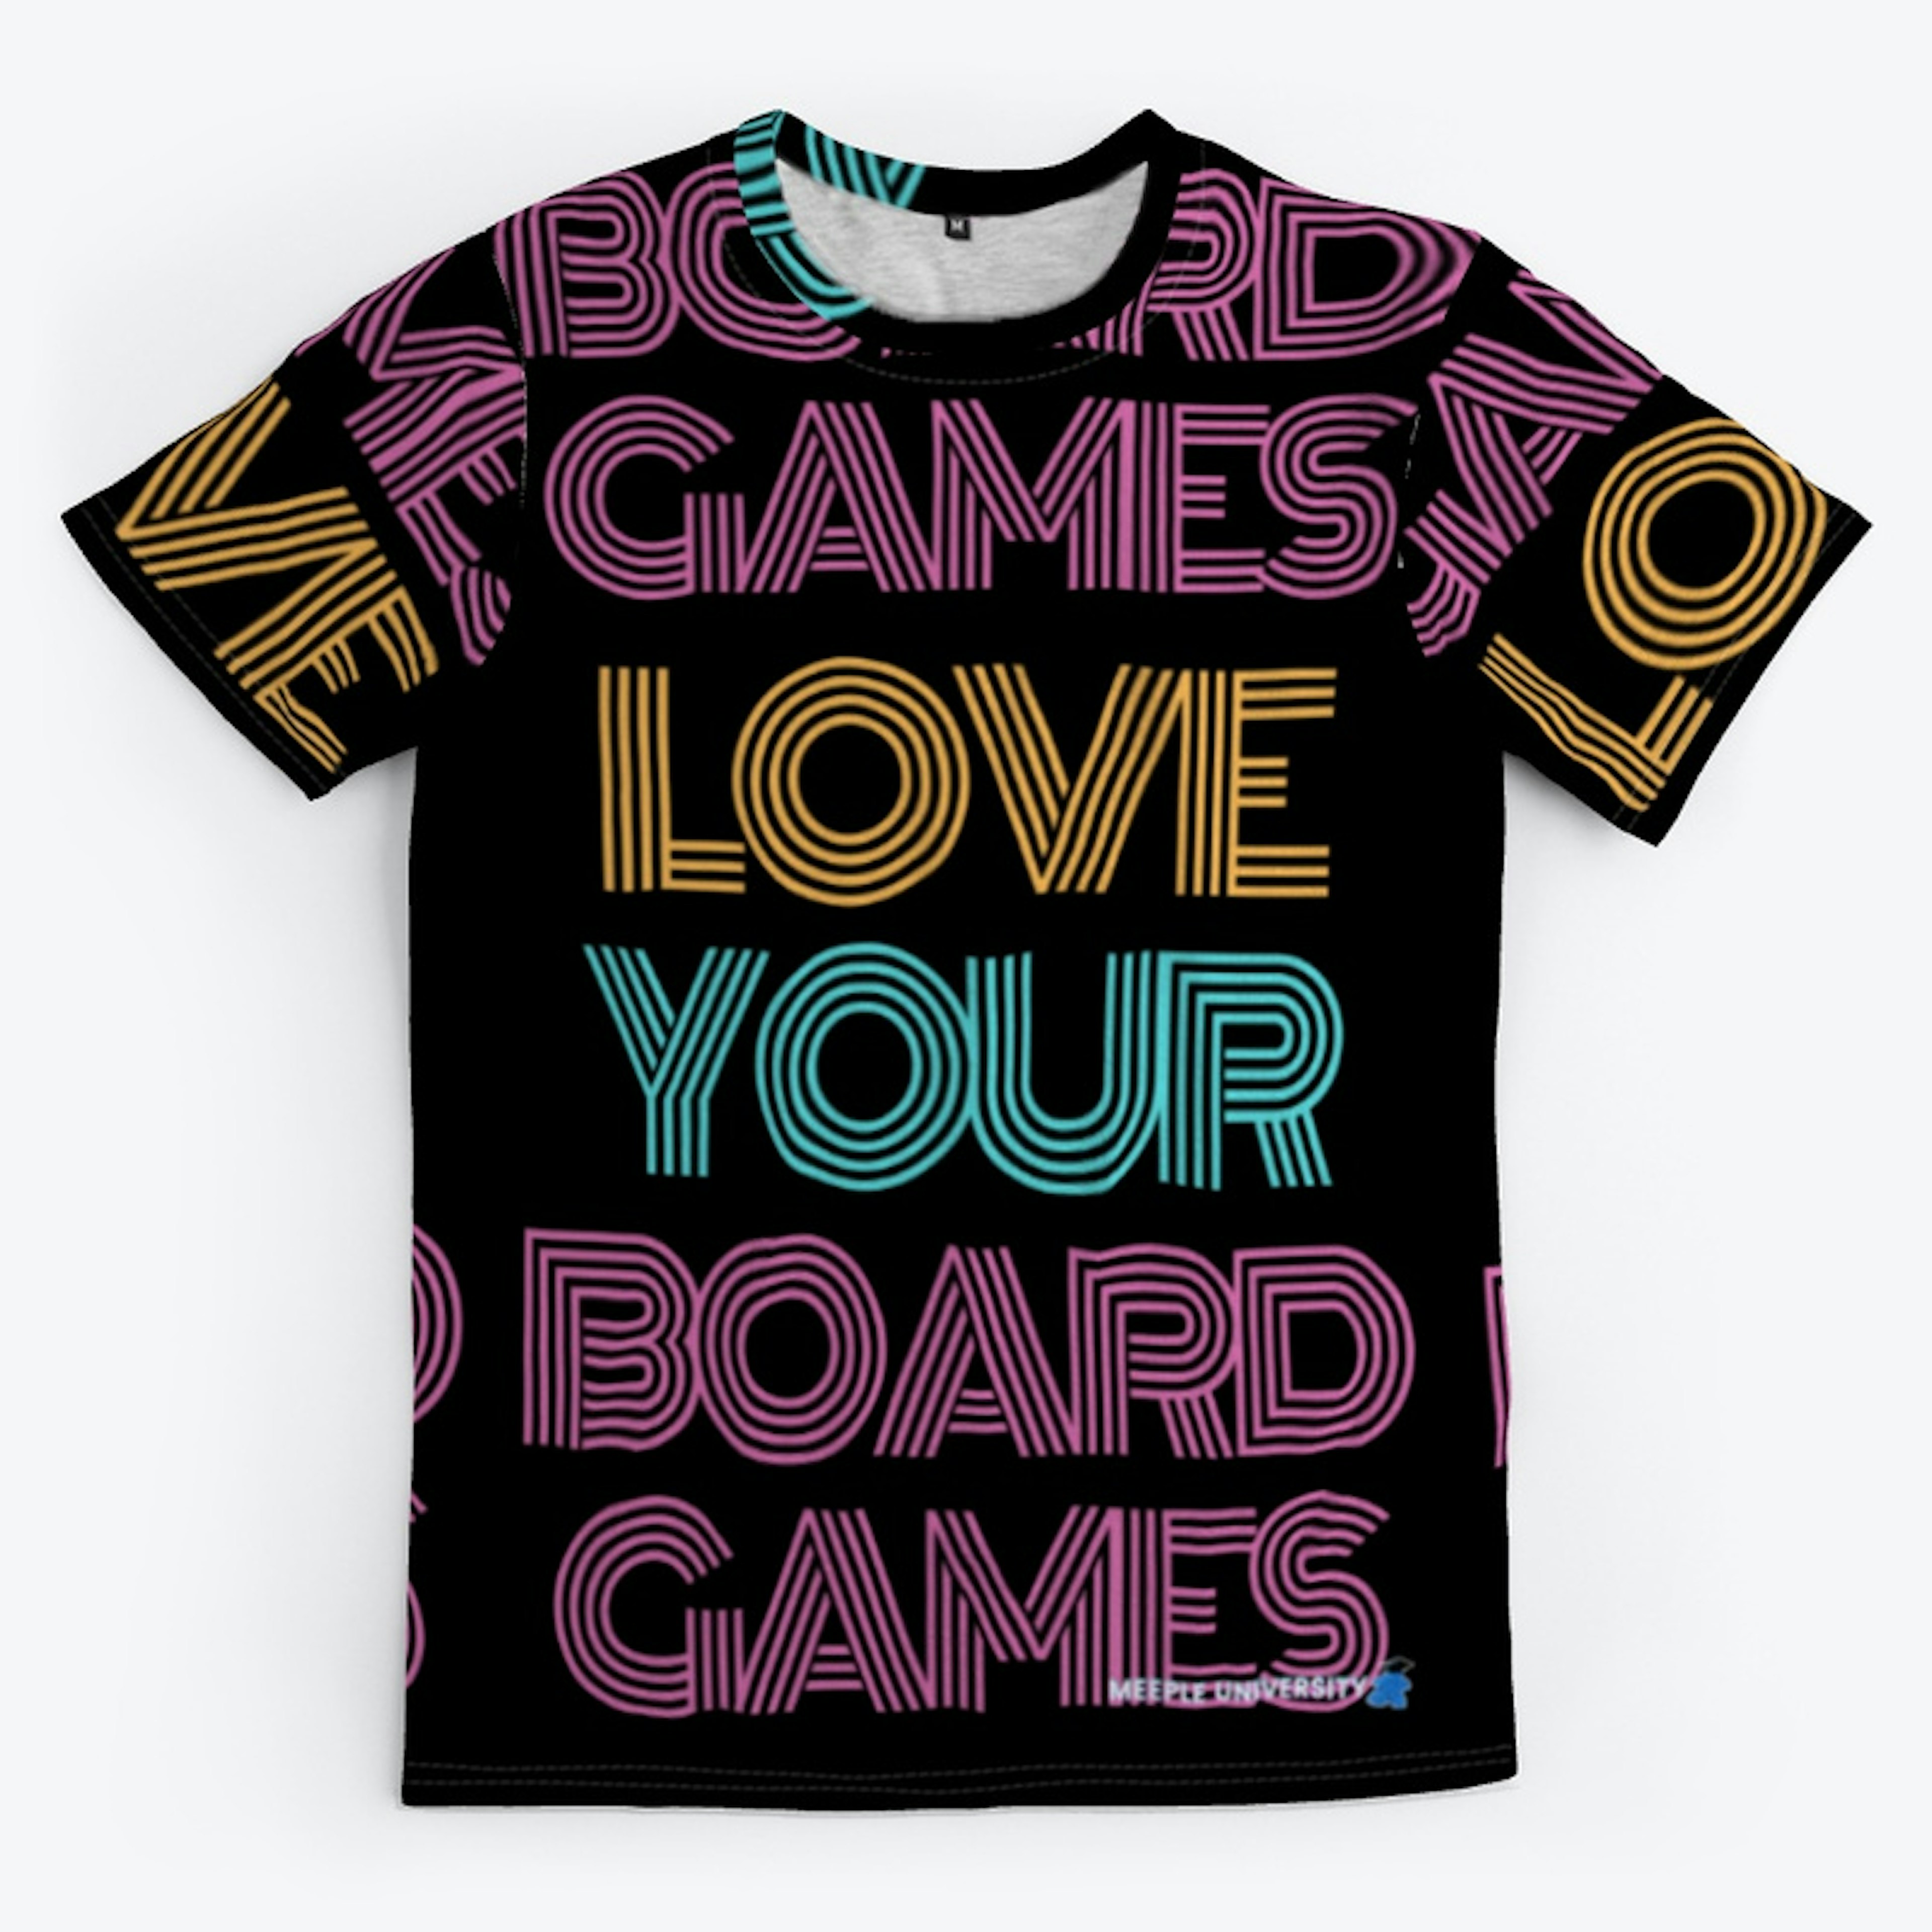 Do you...love your board games?